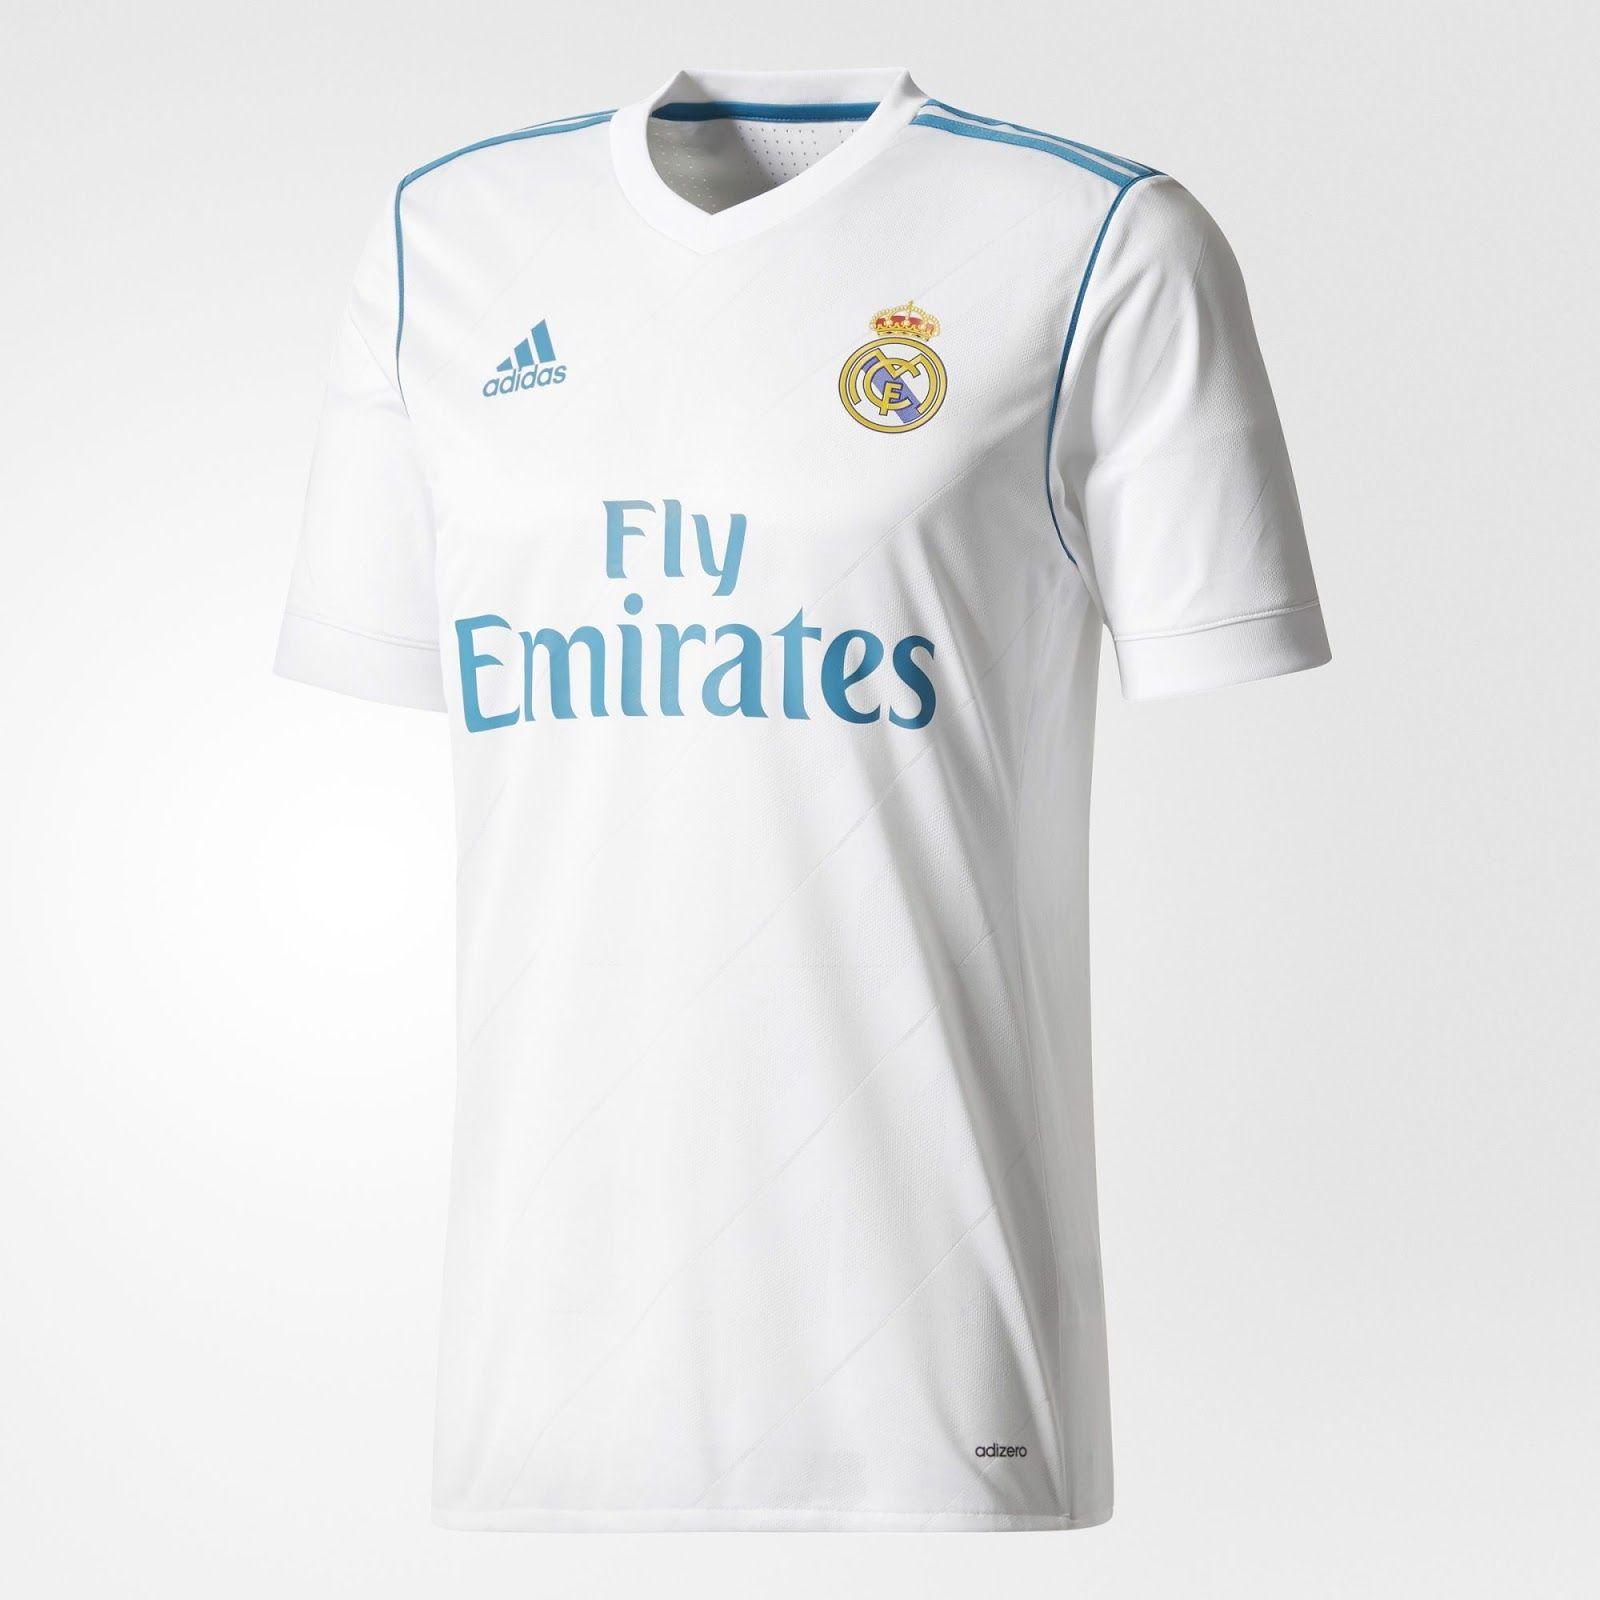 Real Madrid 17 18 Home, Away And Third Kits Revealed